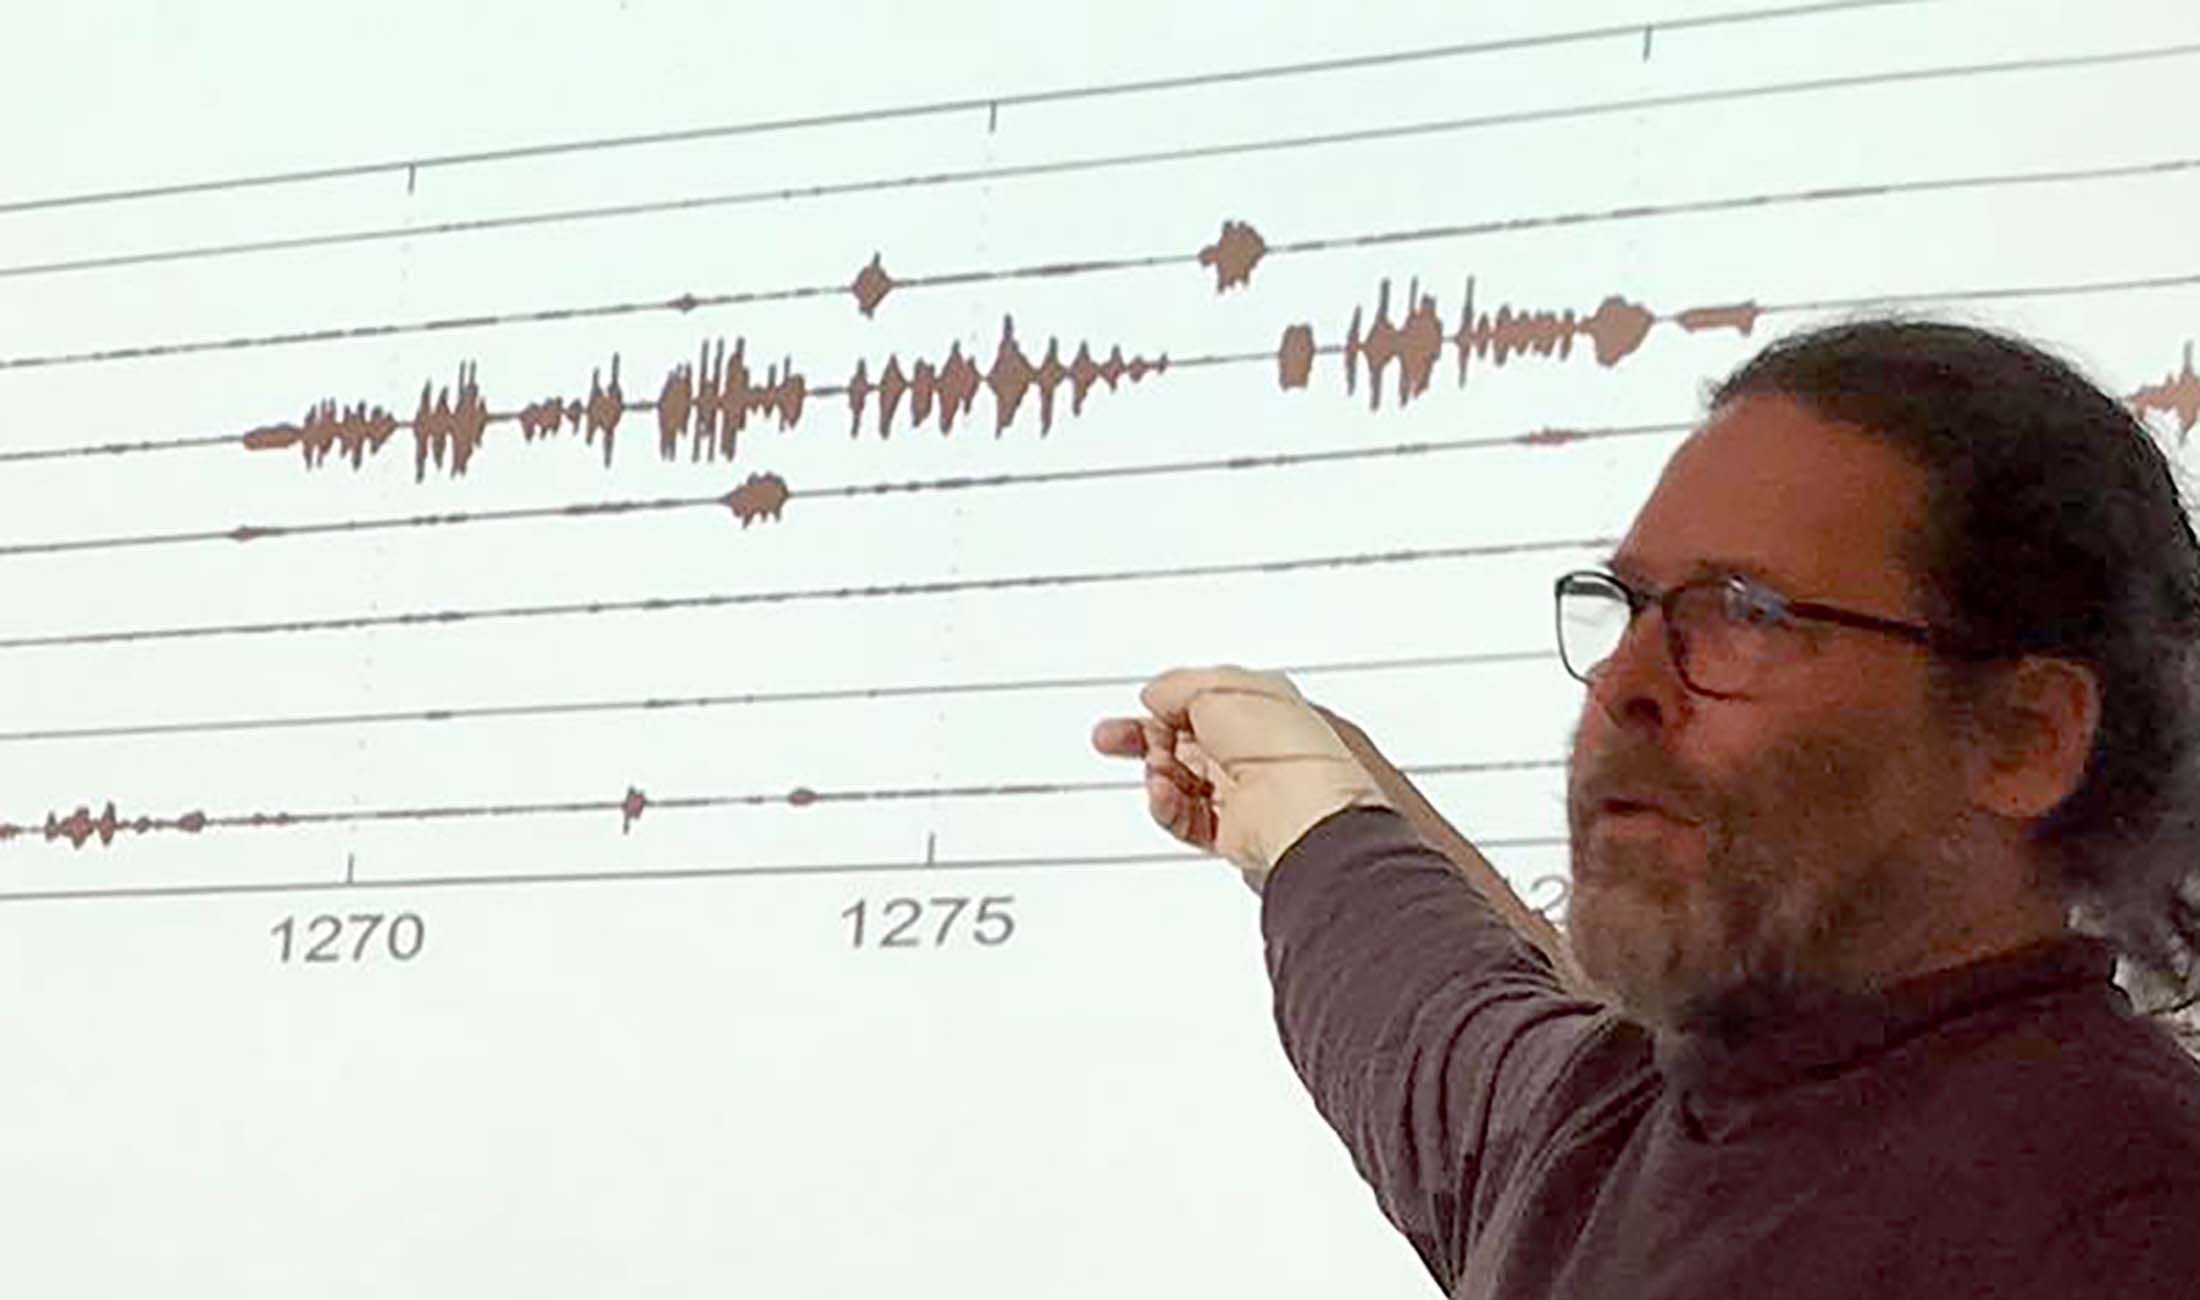 Jens Edlund, Department of Speech, Music and Hearing at the KTH School of Computer Science and Communication, shows how to process recorded speech as sound.